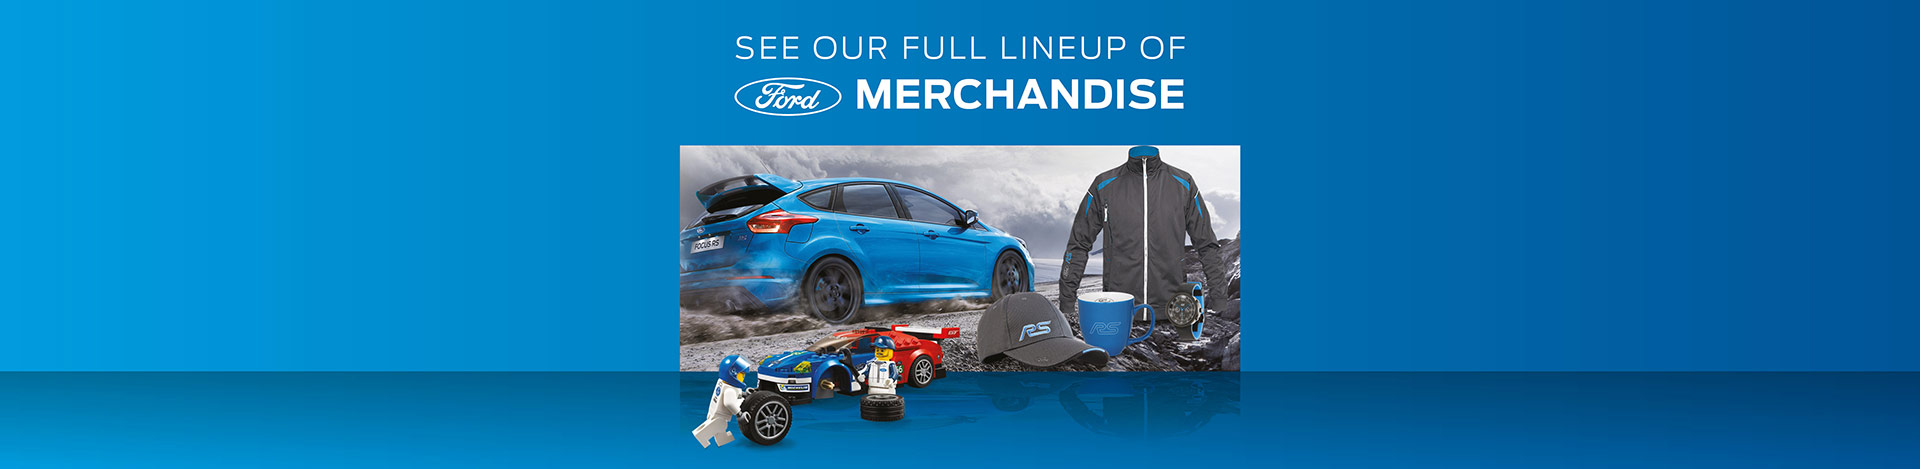 Ford Merchandise Shop Banners